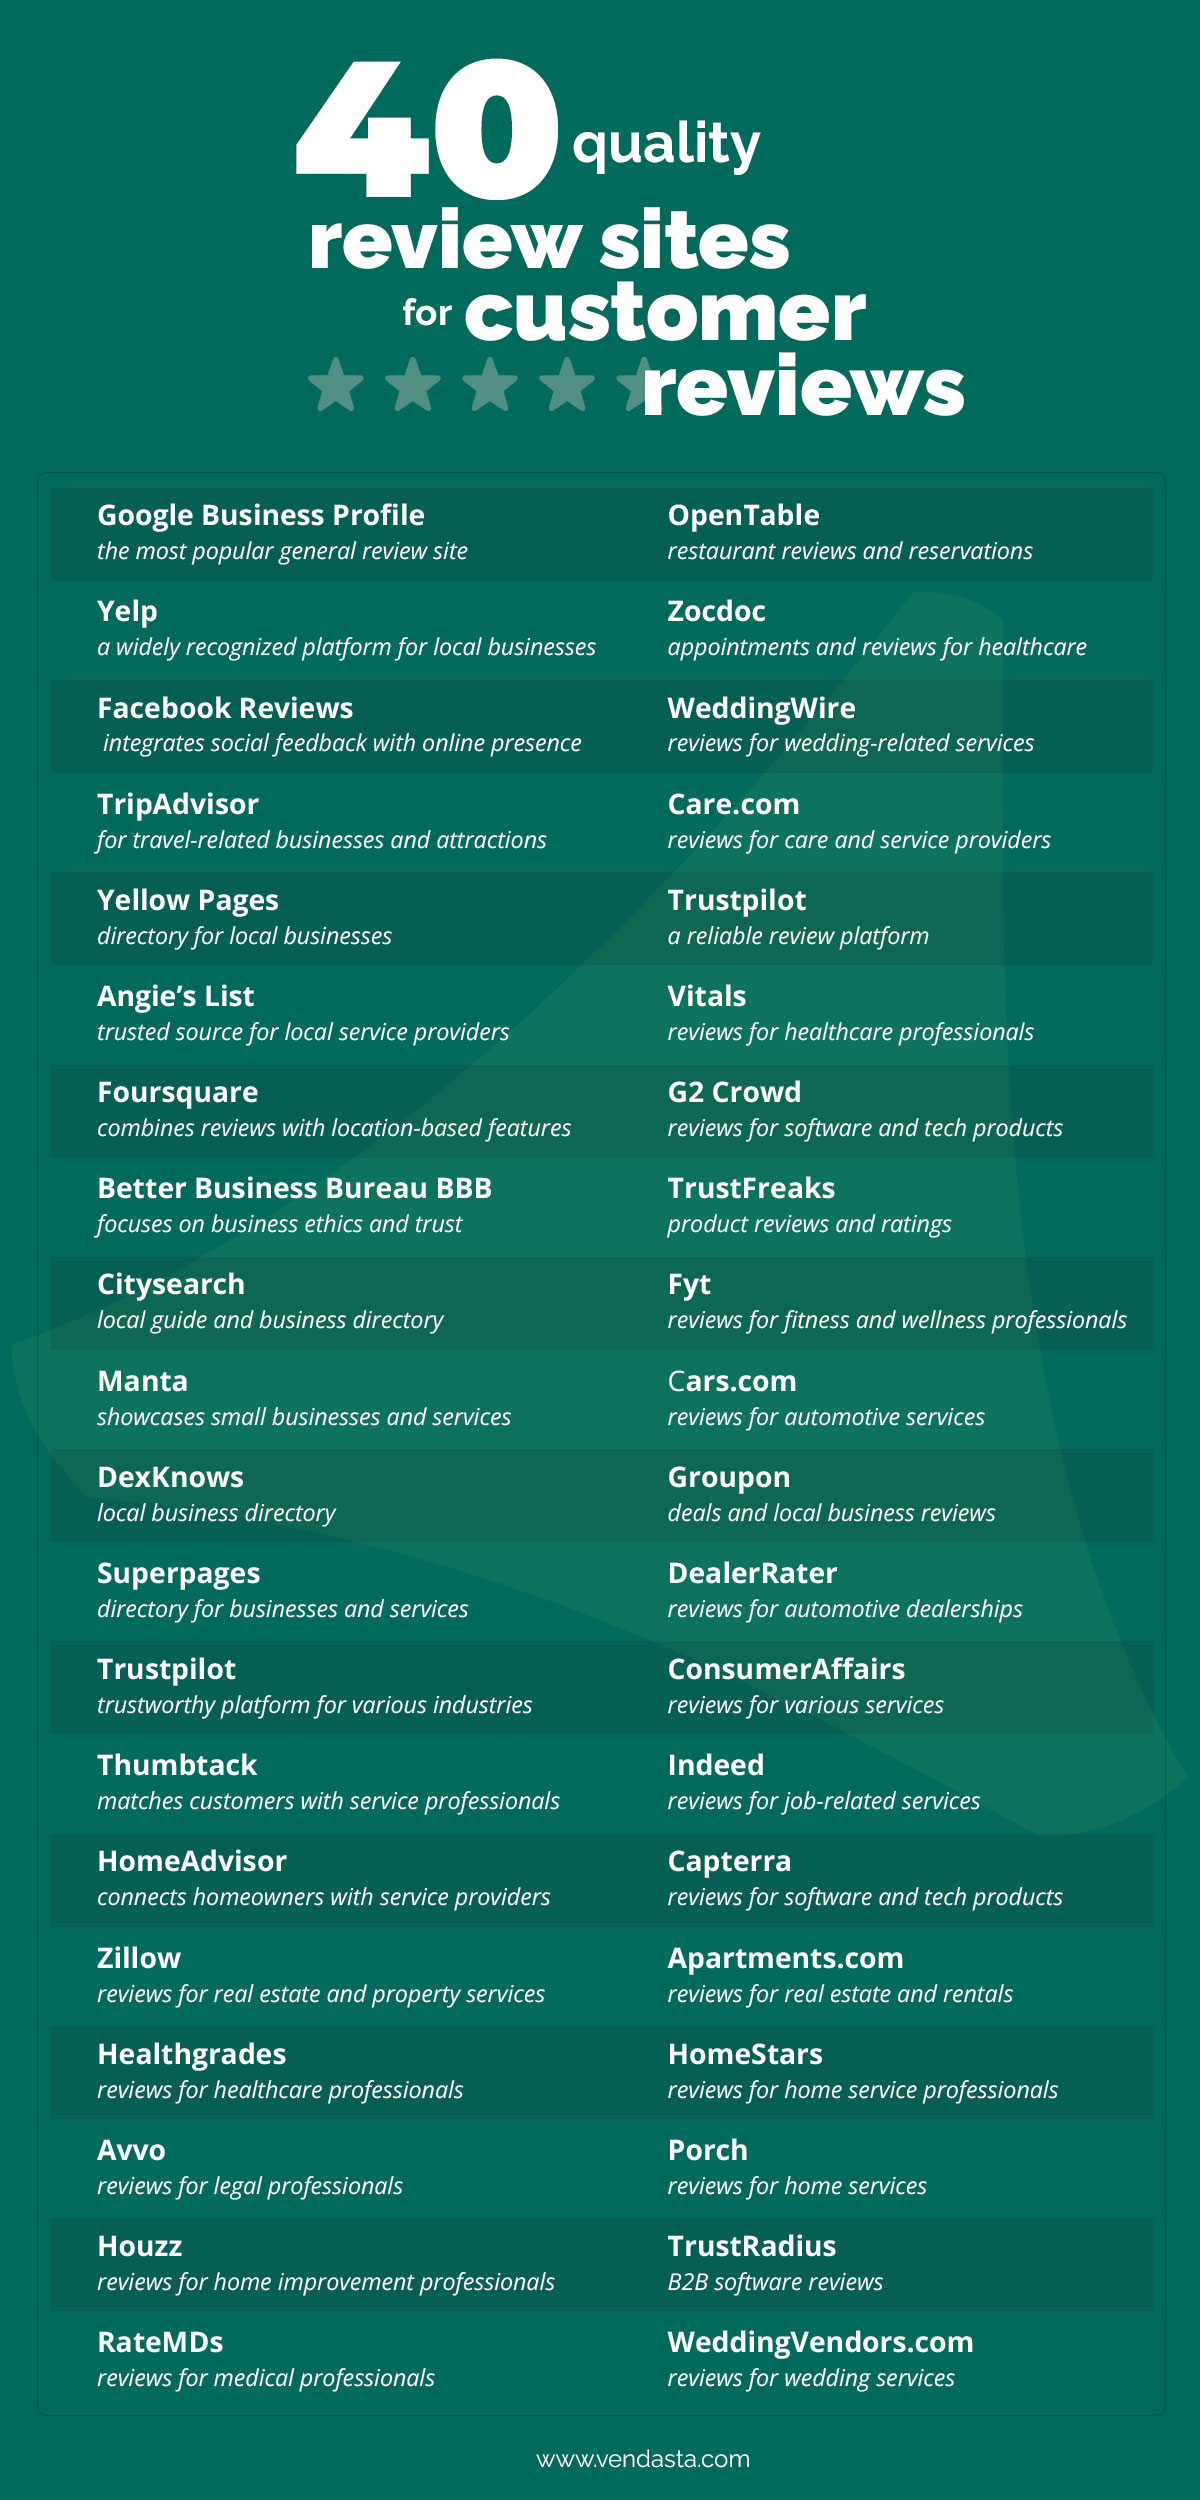 40 Quality Review Websites Chart